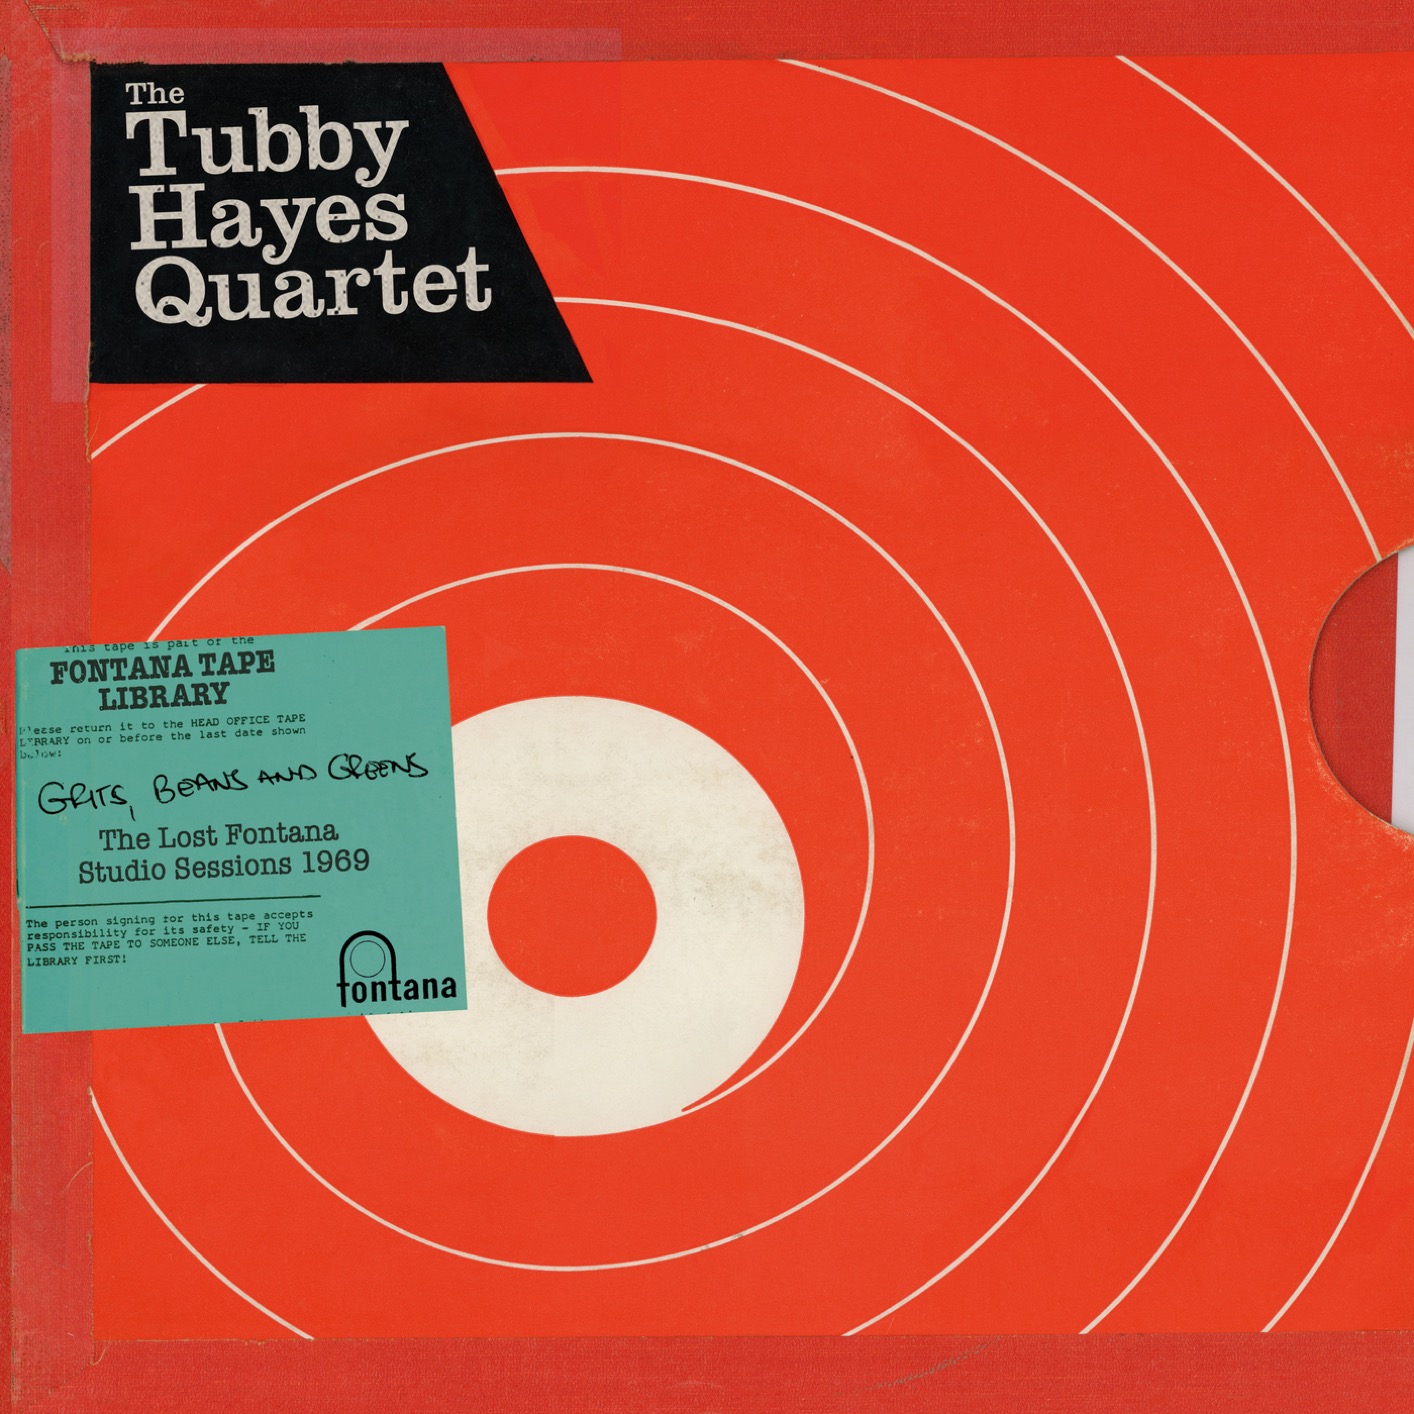 The Tubby Hayes Quartet – Grits, Beans And Greens: The Lost Fontana Studio Sessions 1969 (2019) [FLAC 24bit/88,2kHz]